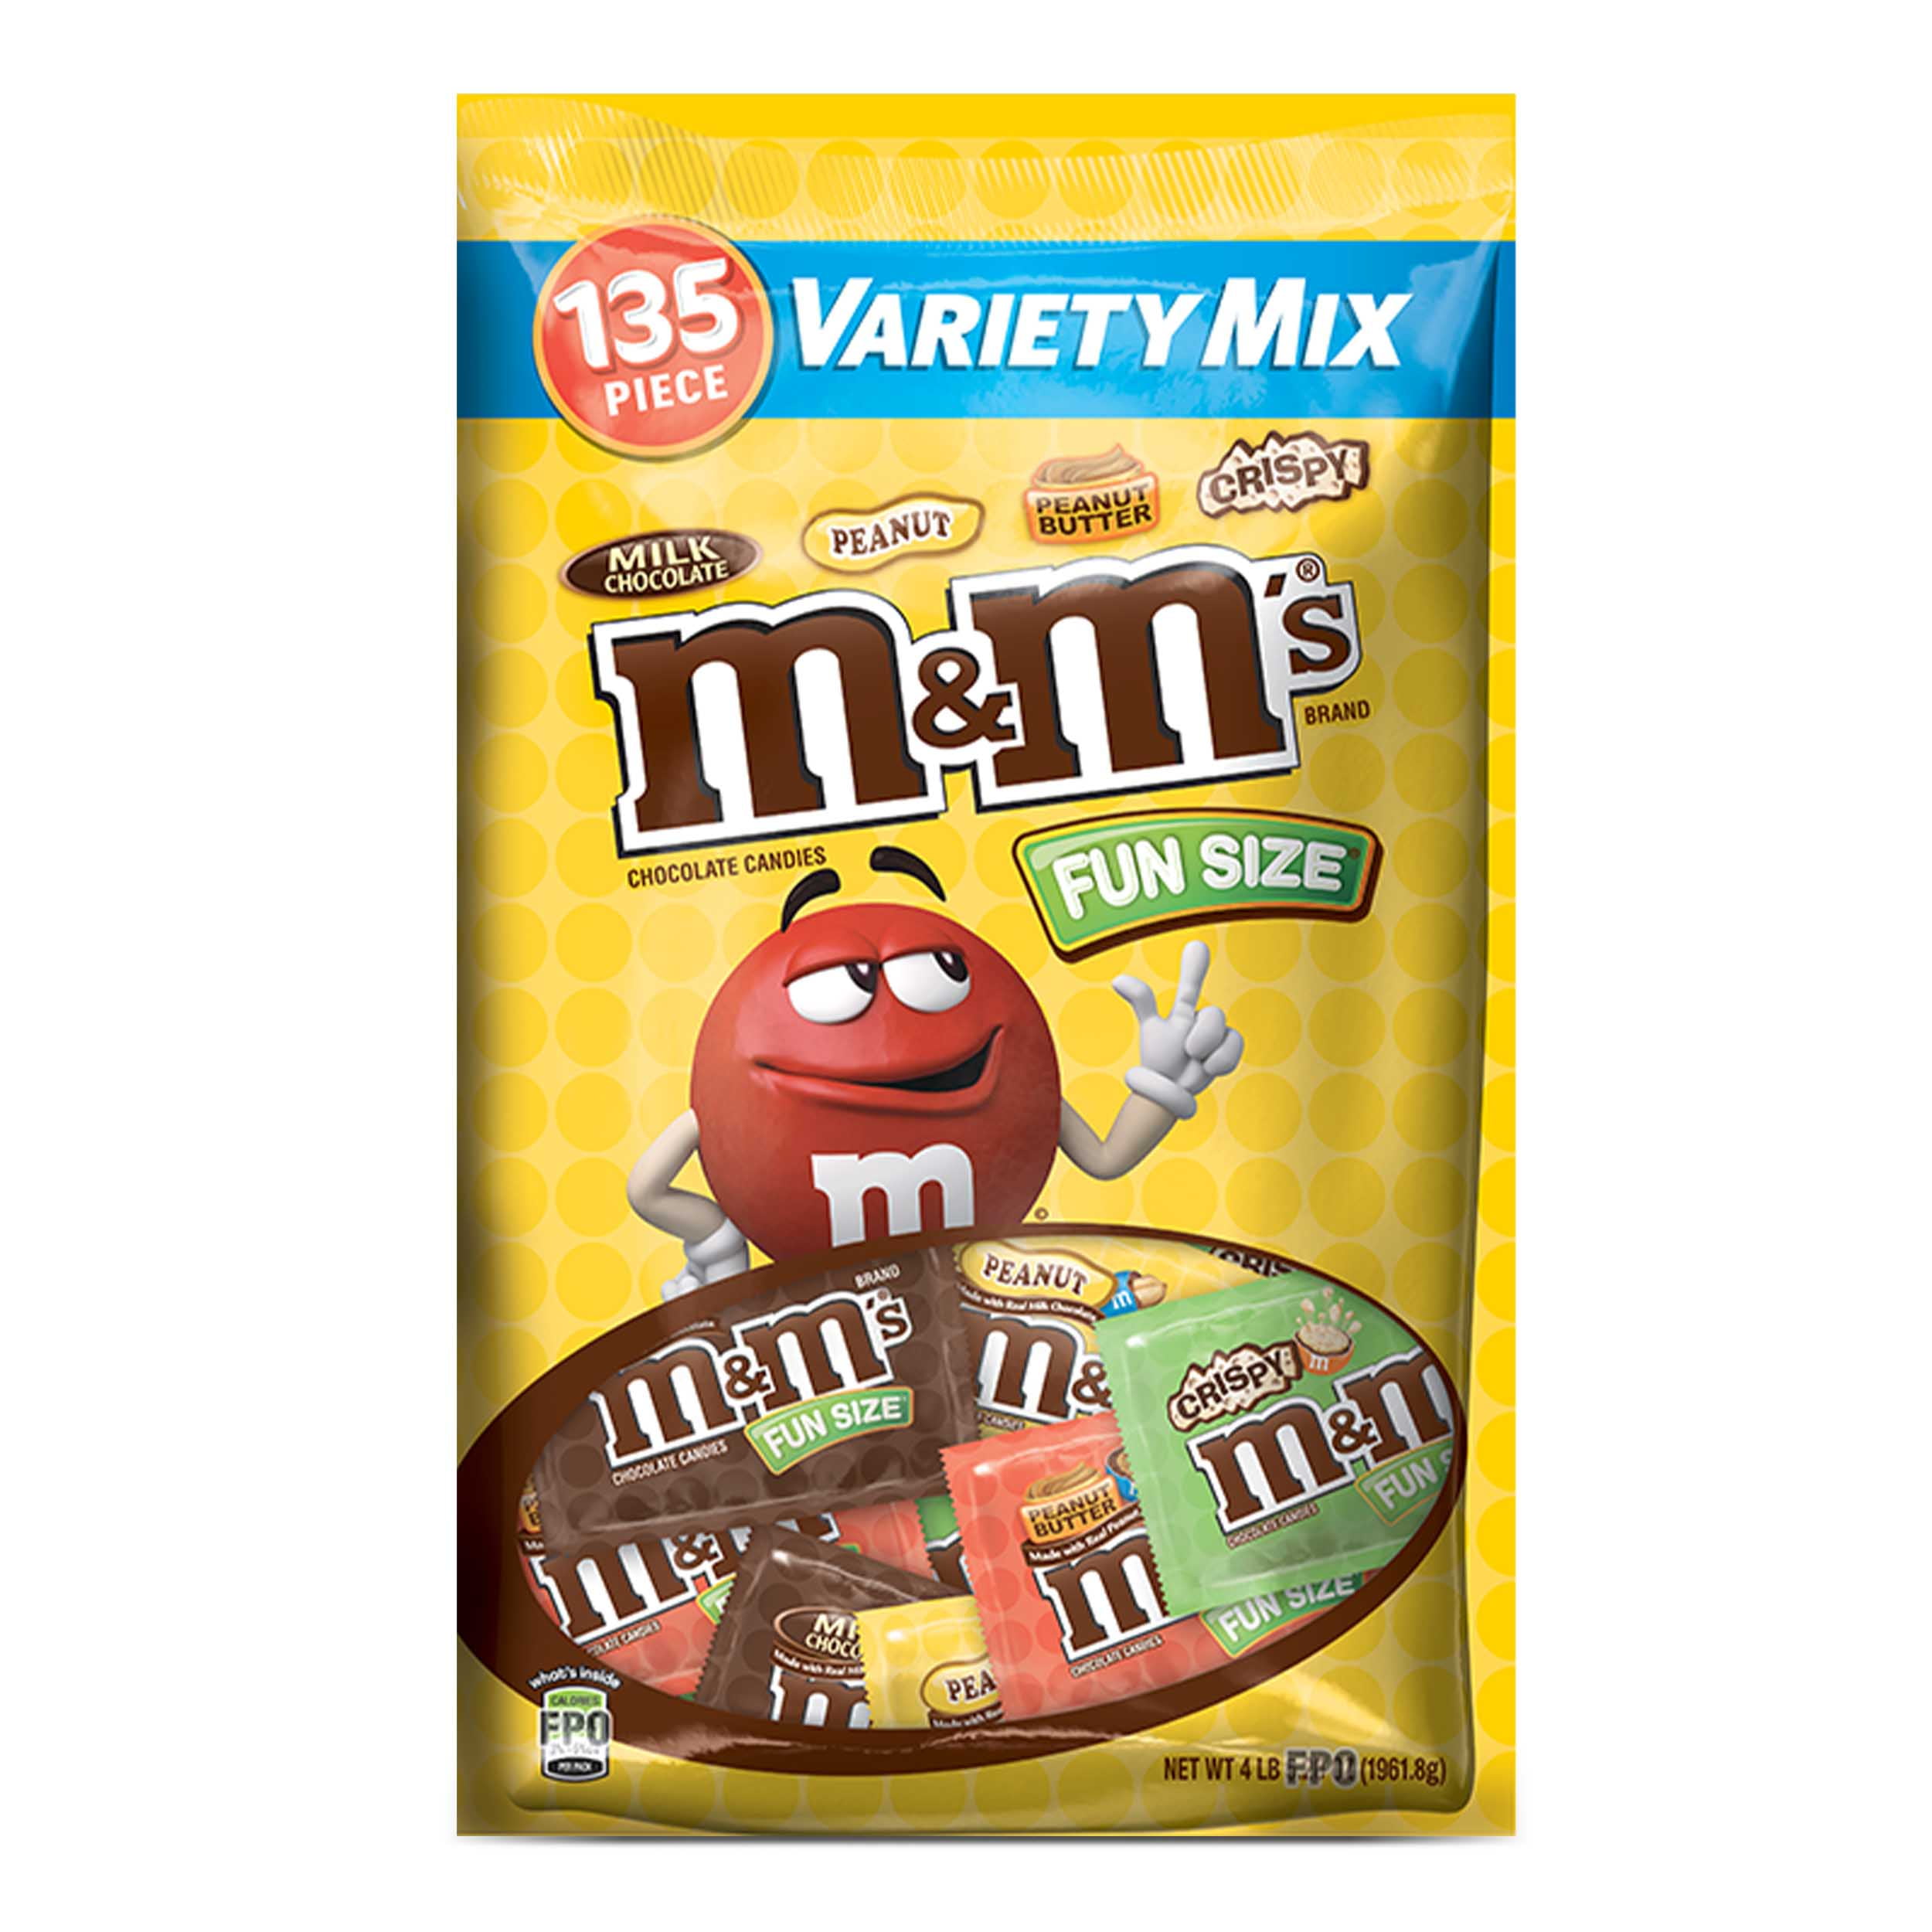 M&M's Mega' To Have Three Times More Chocolate